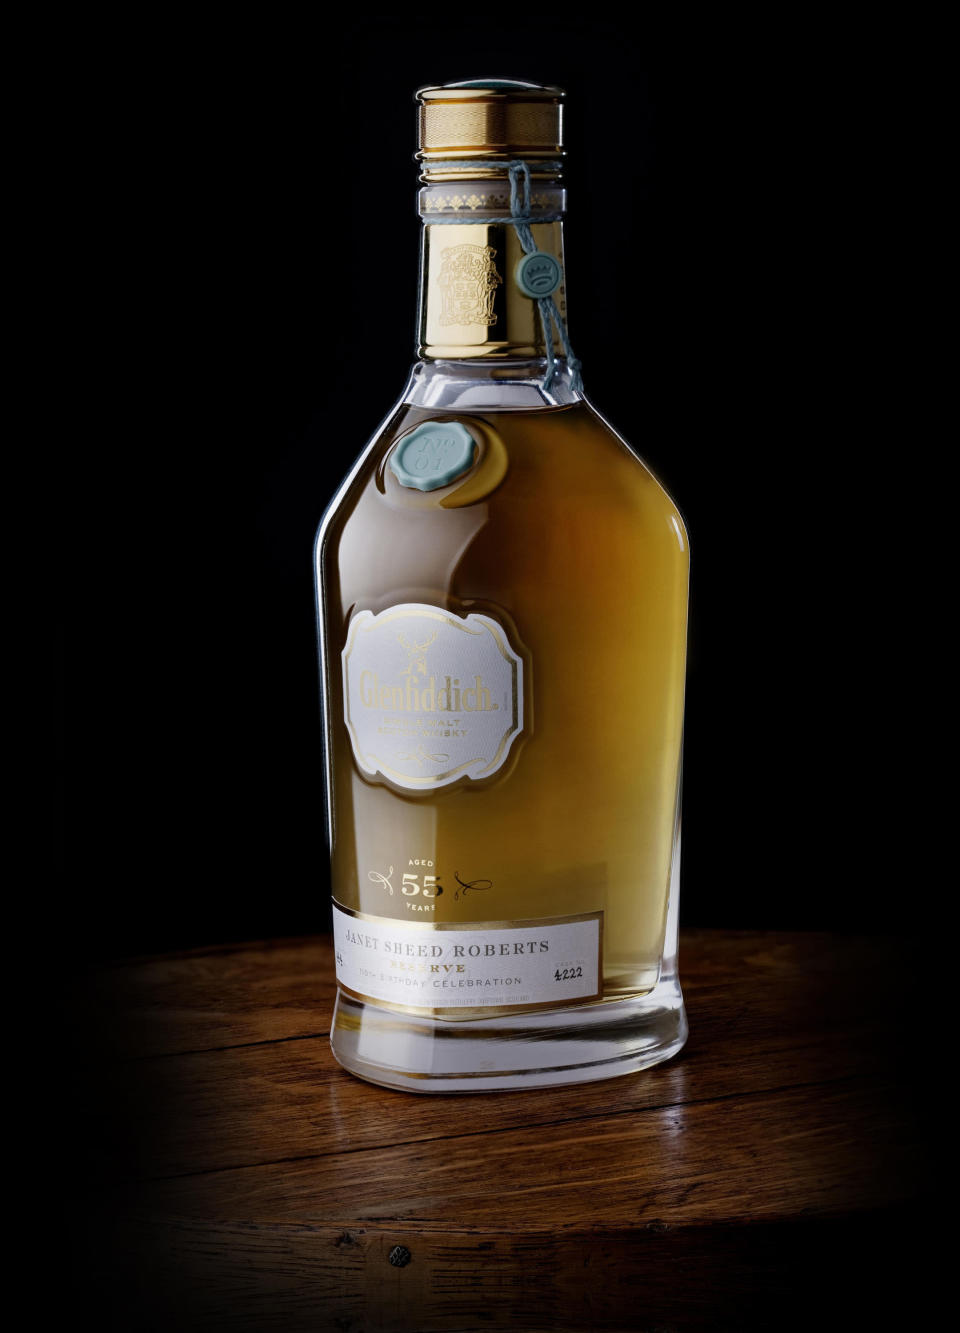 In this undated photo released by Glenfiddich , is a rare bottle of 55-year-old single malt whisky which has set a new world record when it was sold at auction, auctioneers said. The bottle of Glenfiddich Janet Sheed Roberts Reserve fetched 46,850 pounds (US dollars 72,521) at Bonhams auctioneers in Edinburgh Wednesday, Dec. 14 2011.ÅIt is the first of 11 bottles of the 1955 tipple to be released to the public to honour Janet Sheed Roberts, the granddaughter of William Grant who founded the Glenfiddich distillery. (AP Photo / Glenfiddich)